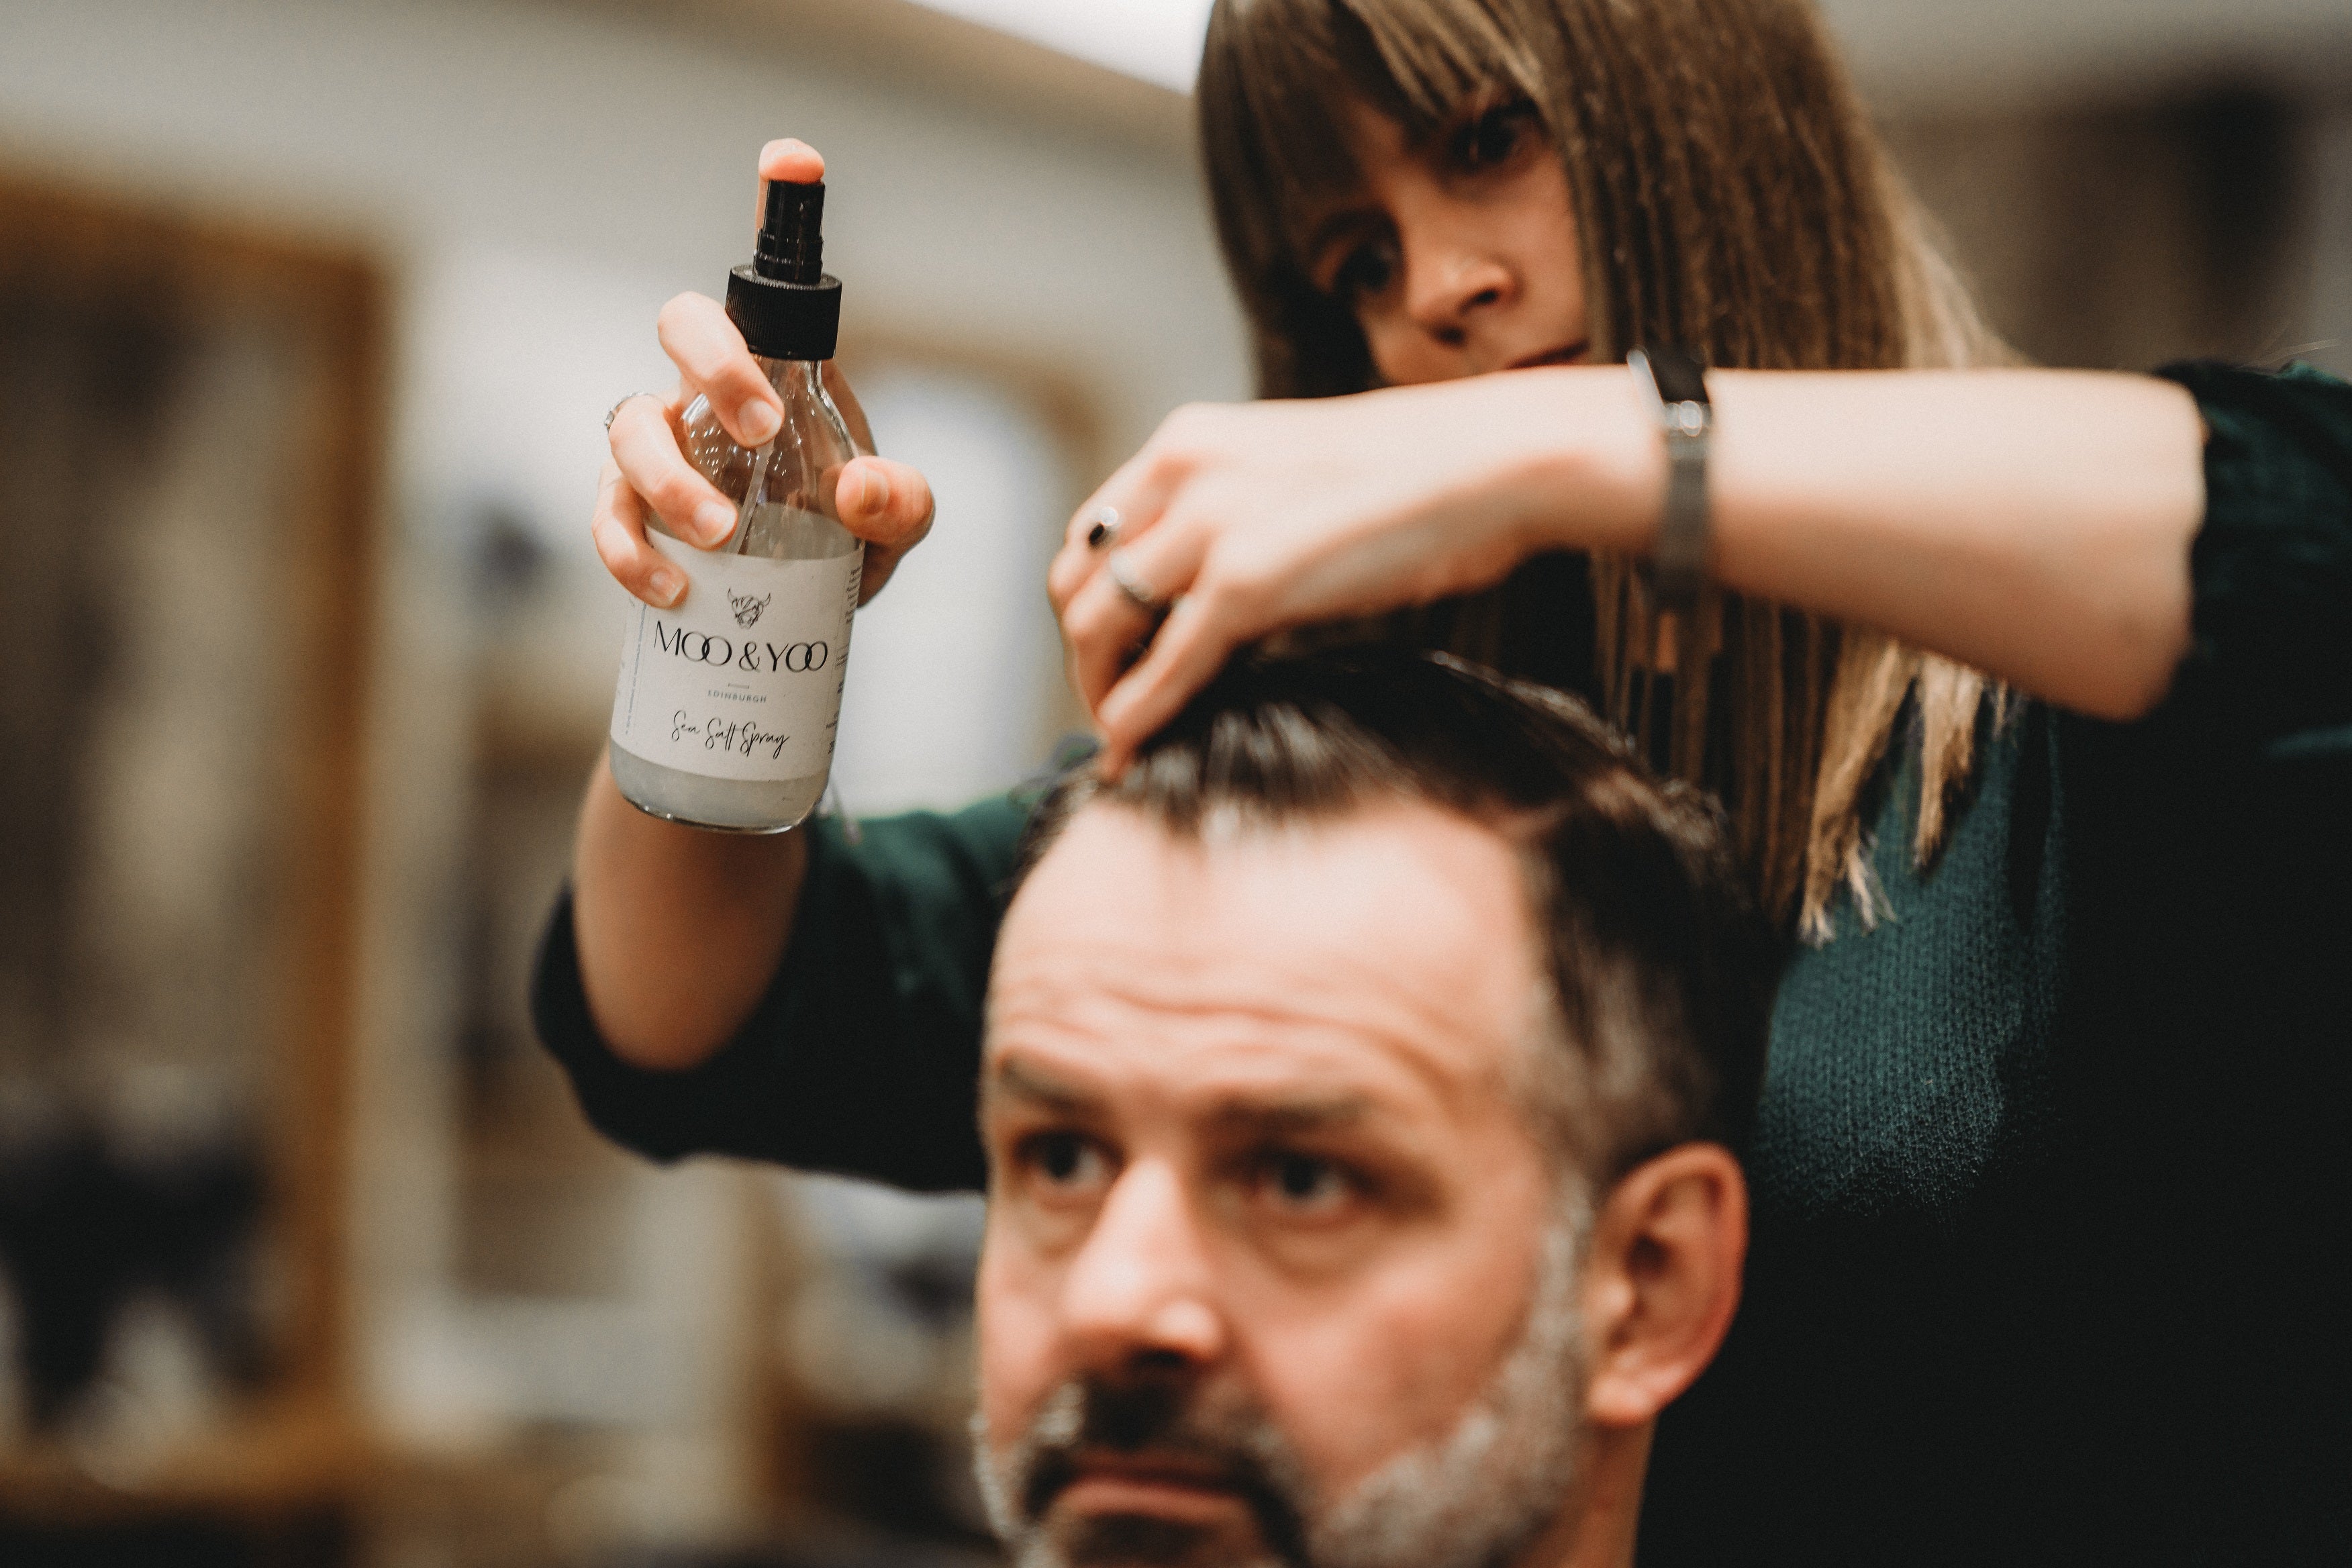 Our sea salt spray being sprayed into a mans hair by a female hair stylist. He has cropped dark hair and she is styling it with her free hand.